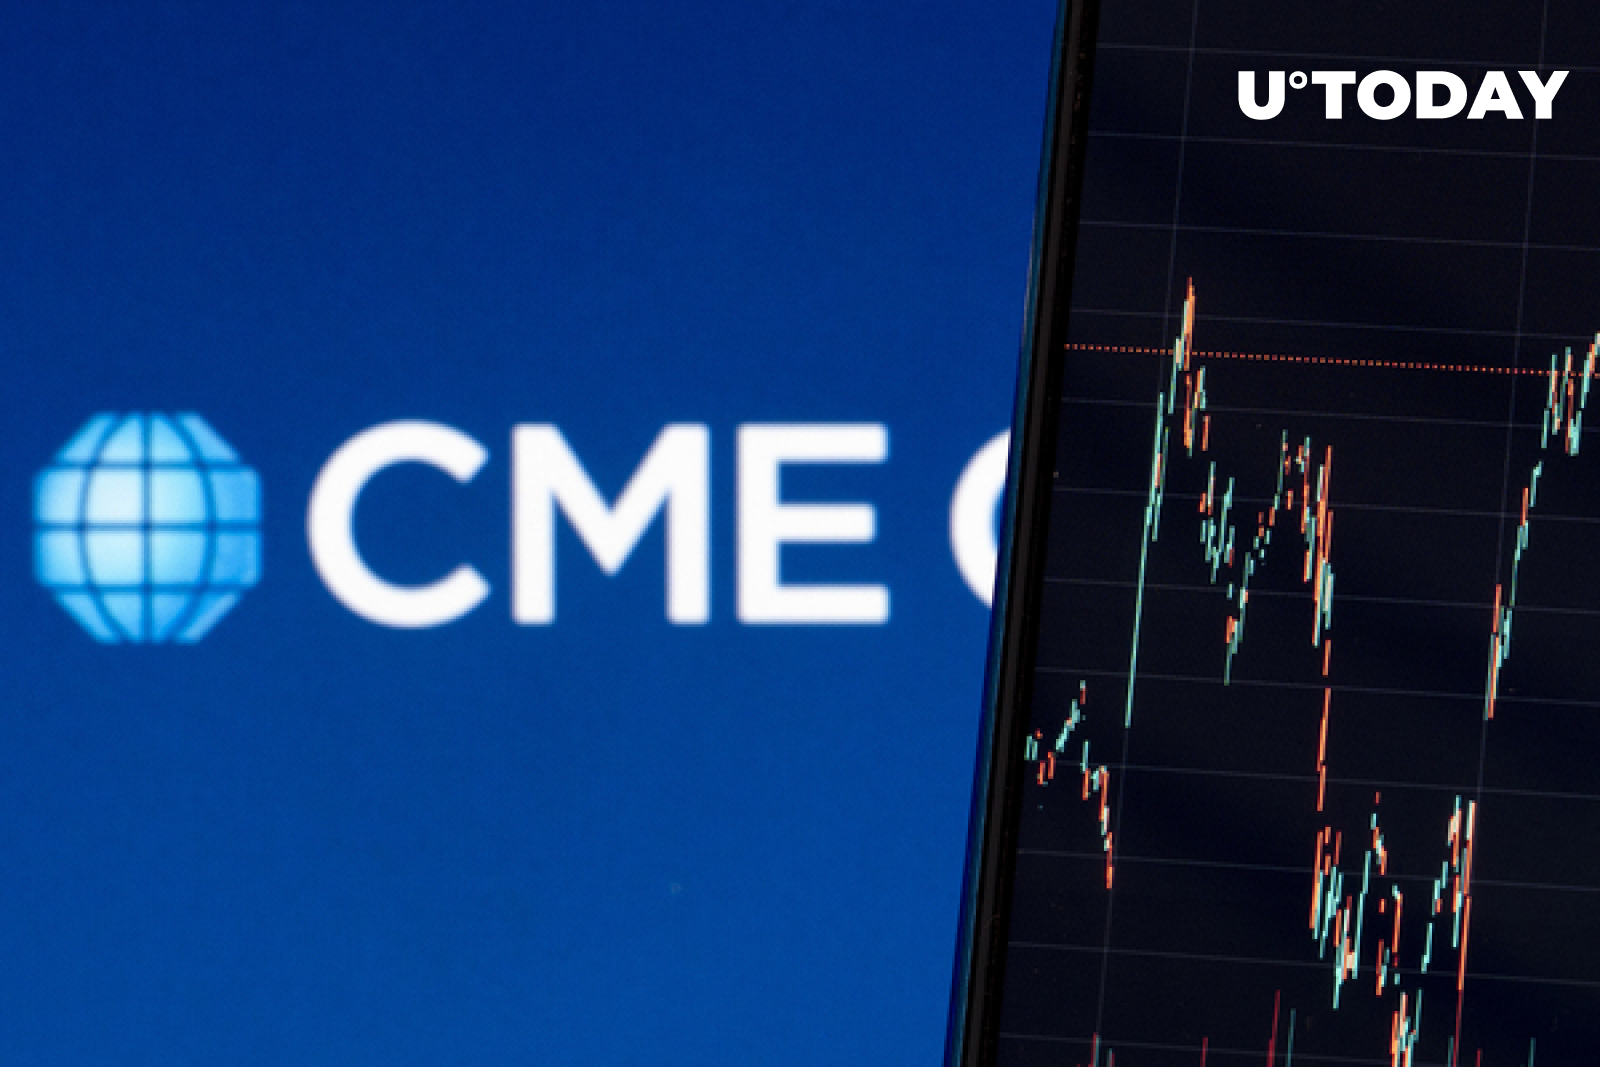 Euro-Denominated Bitcoin and Ethereum Futures to Be Launched by CME